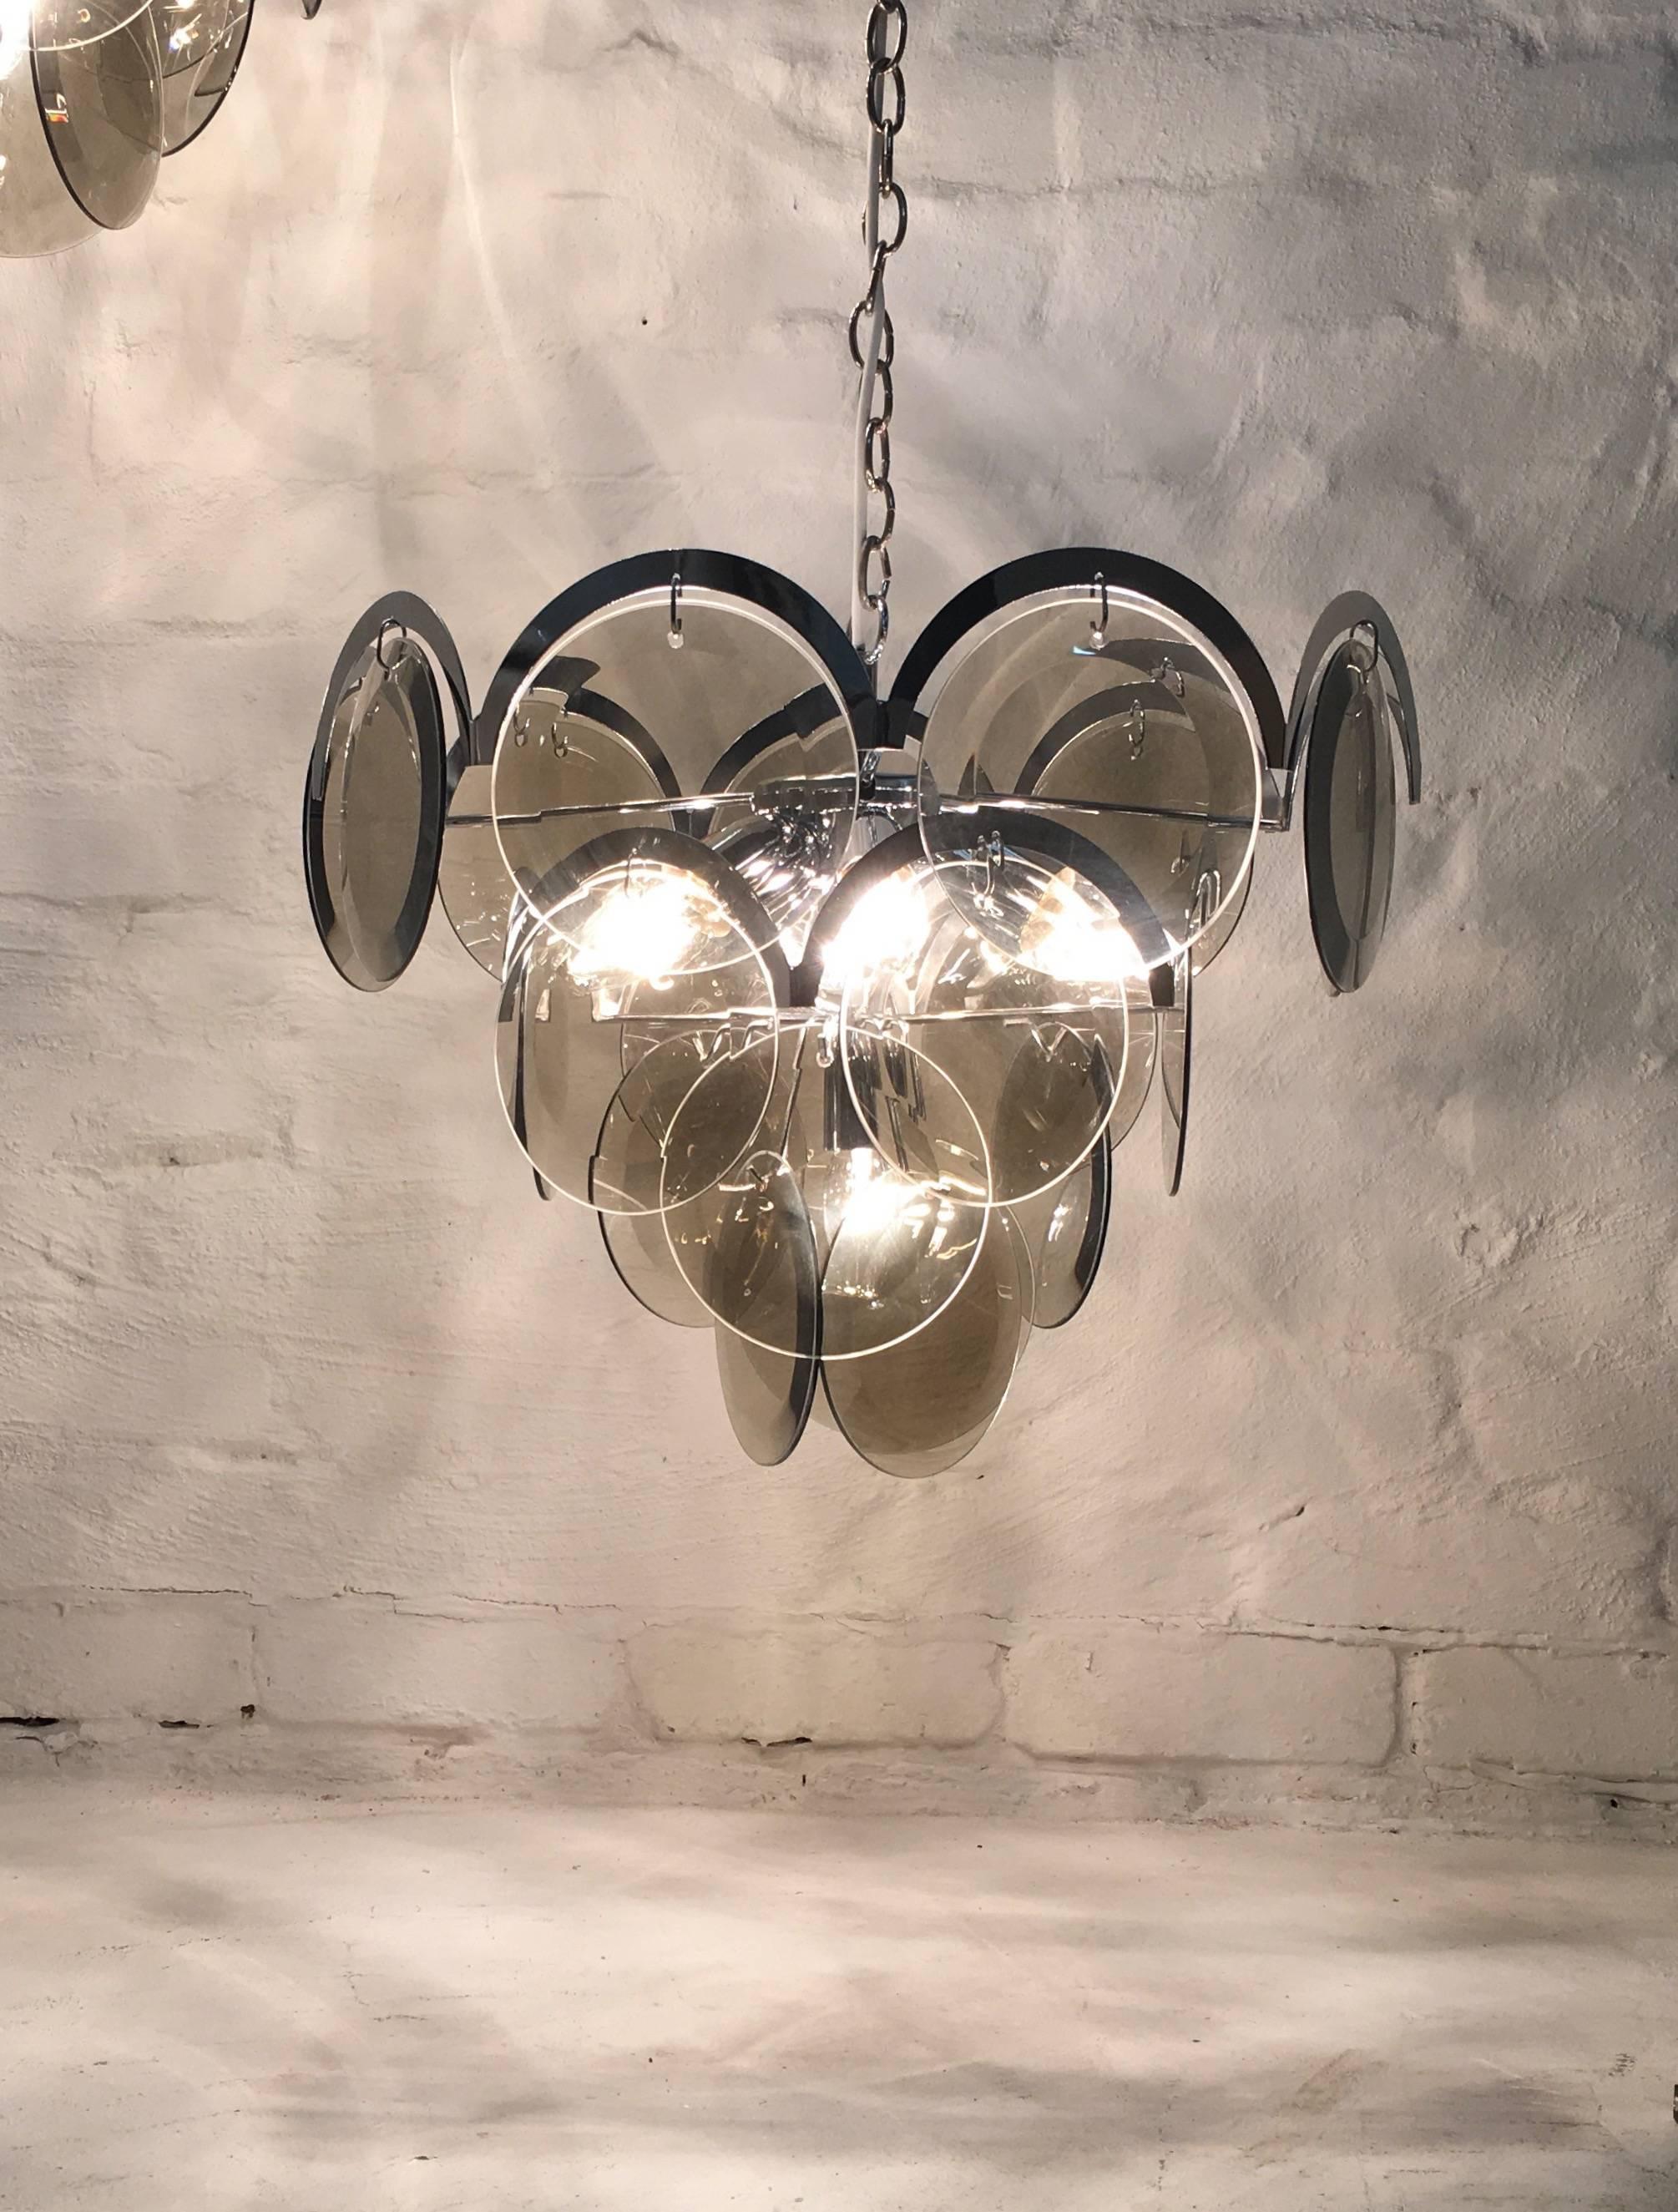 A superb four-tier chandelier by Vistosi, Italy, manufactured around 1978. In beautifully clean and sound condition. 

This item is the smaller of the two pictured and hangs lower in the images. A pair of the larger size is now listed separately on